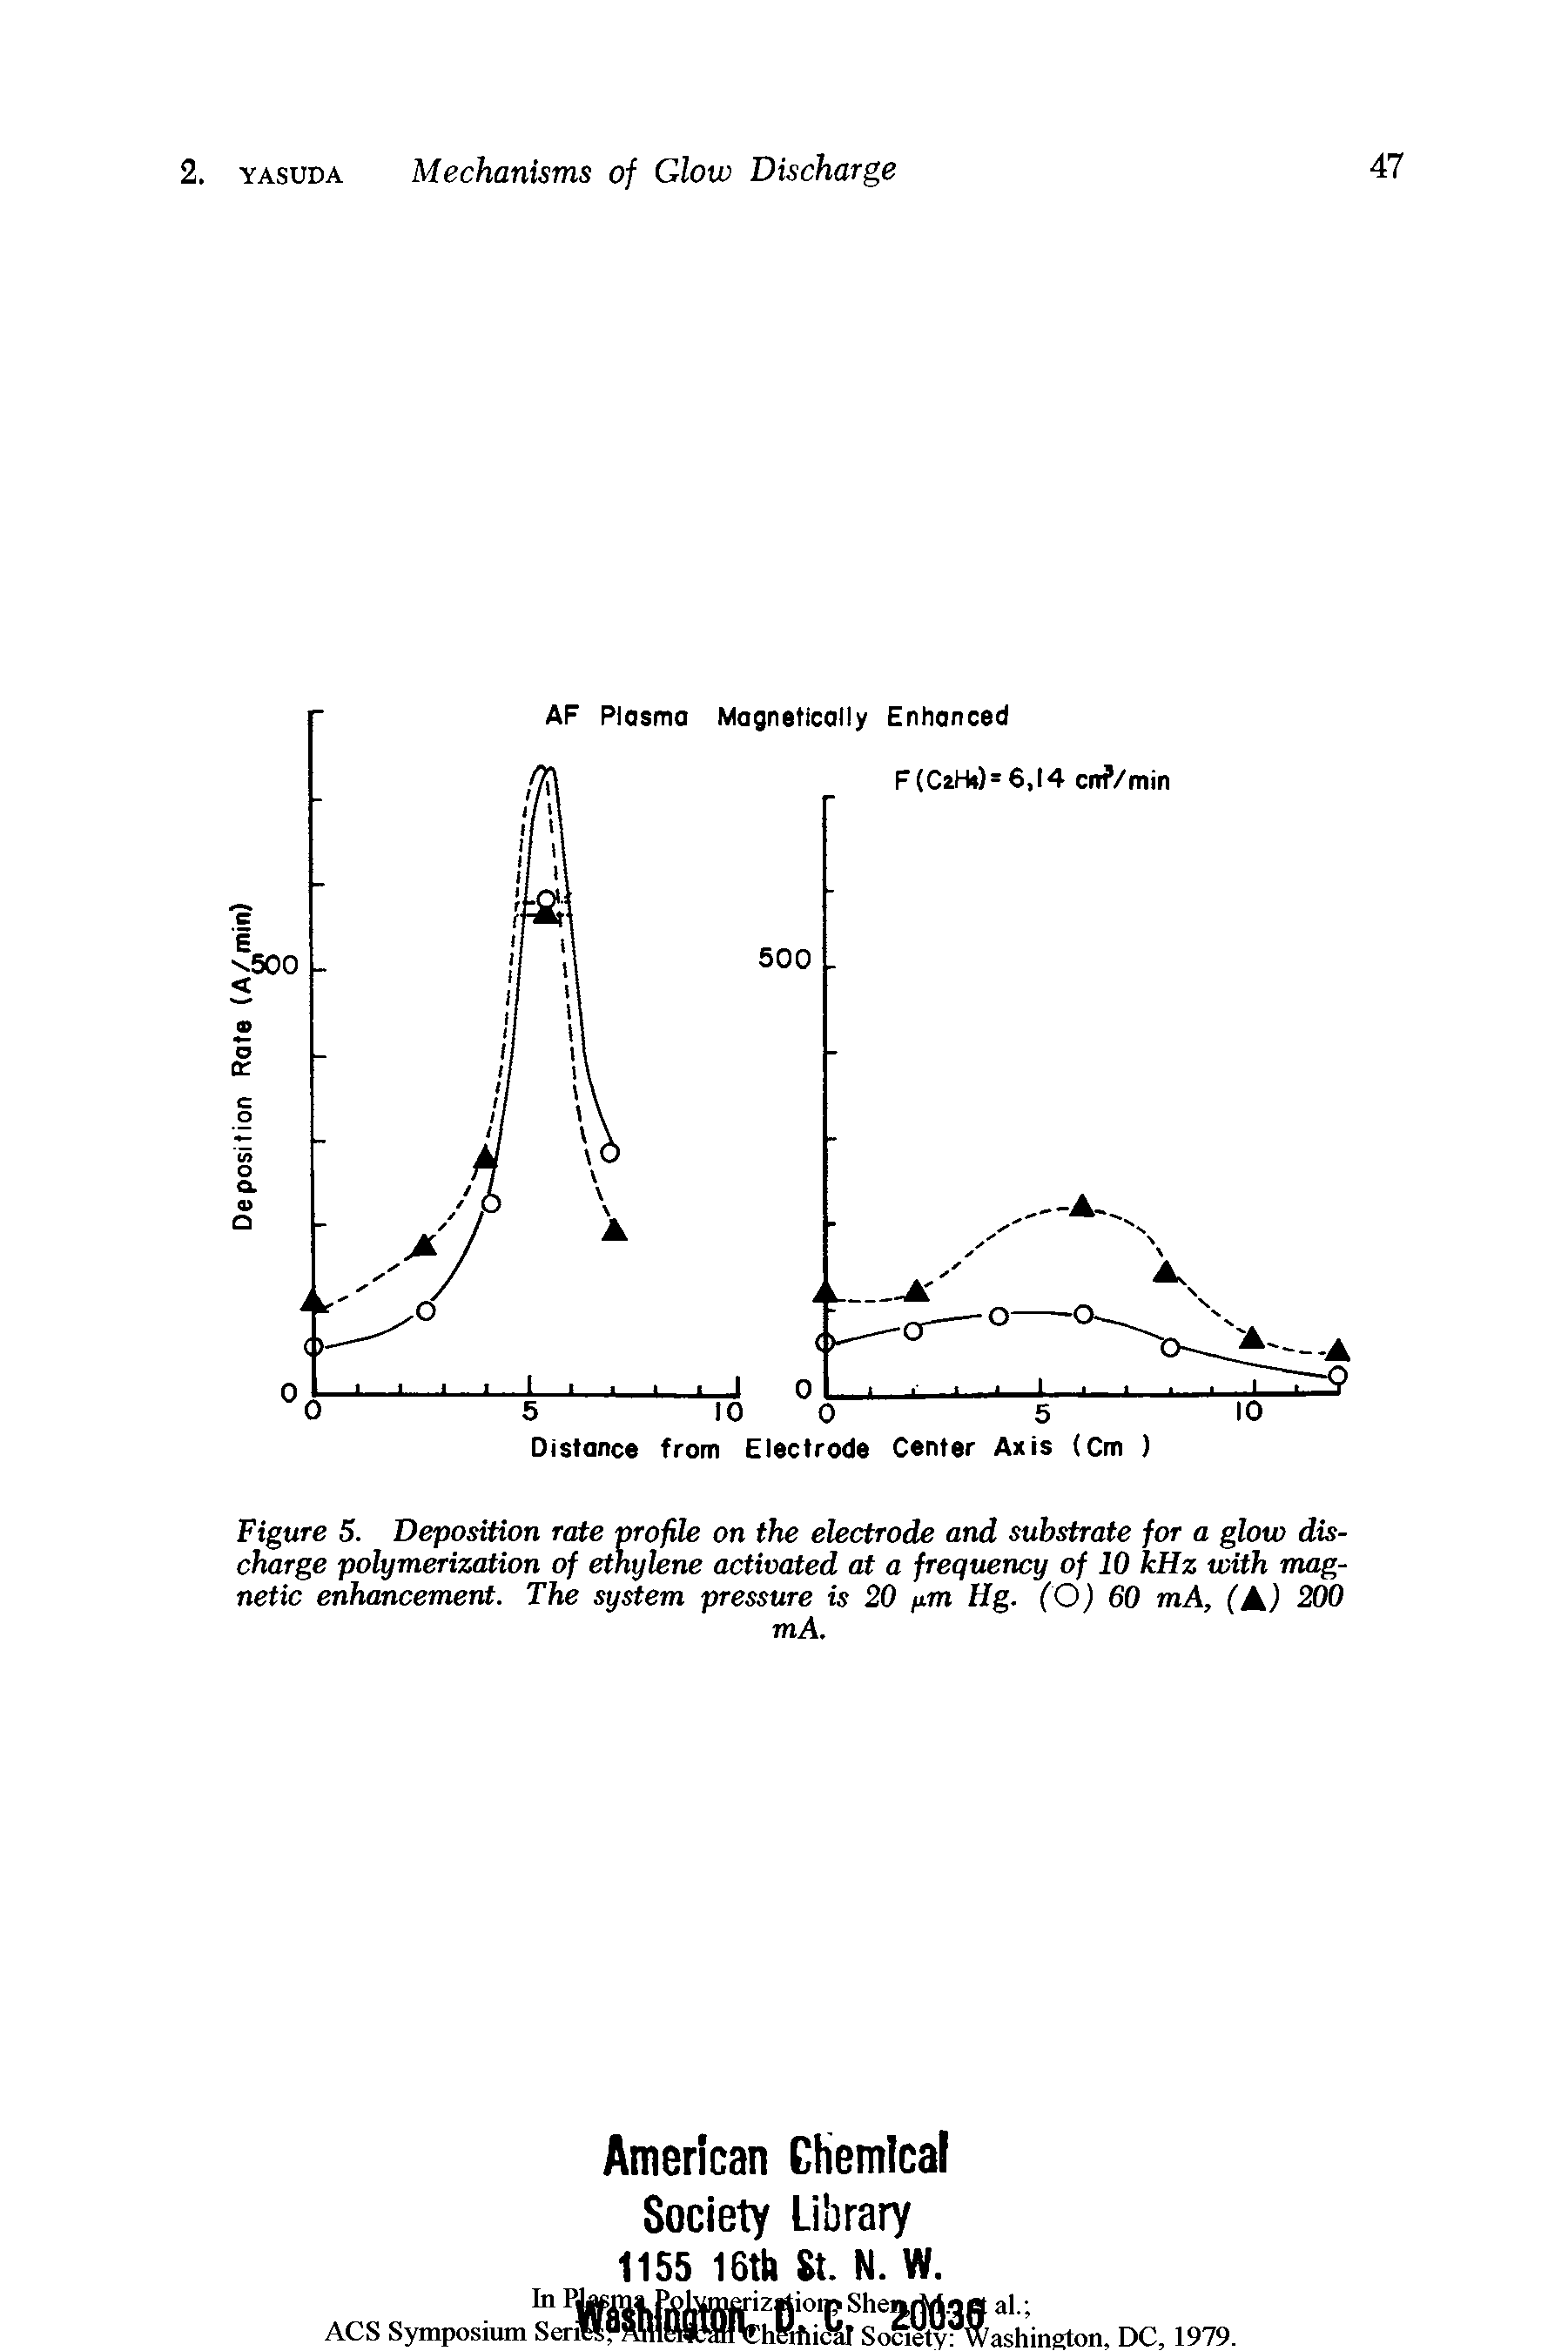 Figure 5. Deposition rate profile on the electrode and substrate for a glow discharge polymerization of ethylene activated at a frequency of 10 kHz with magnetic enhancement. The system pressure is 20 fim Hg. (O) 60 mA, (A) 200...